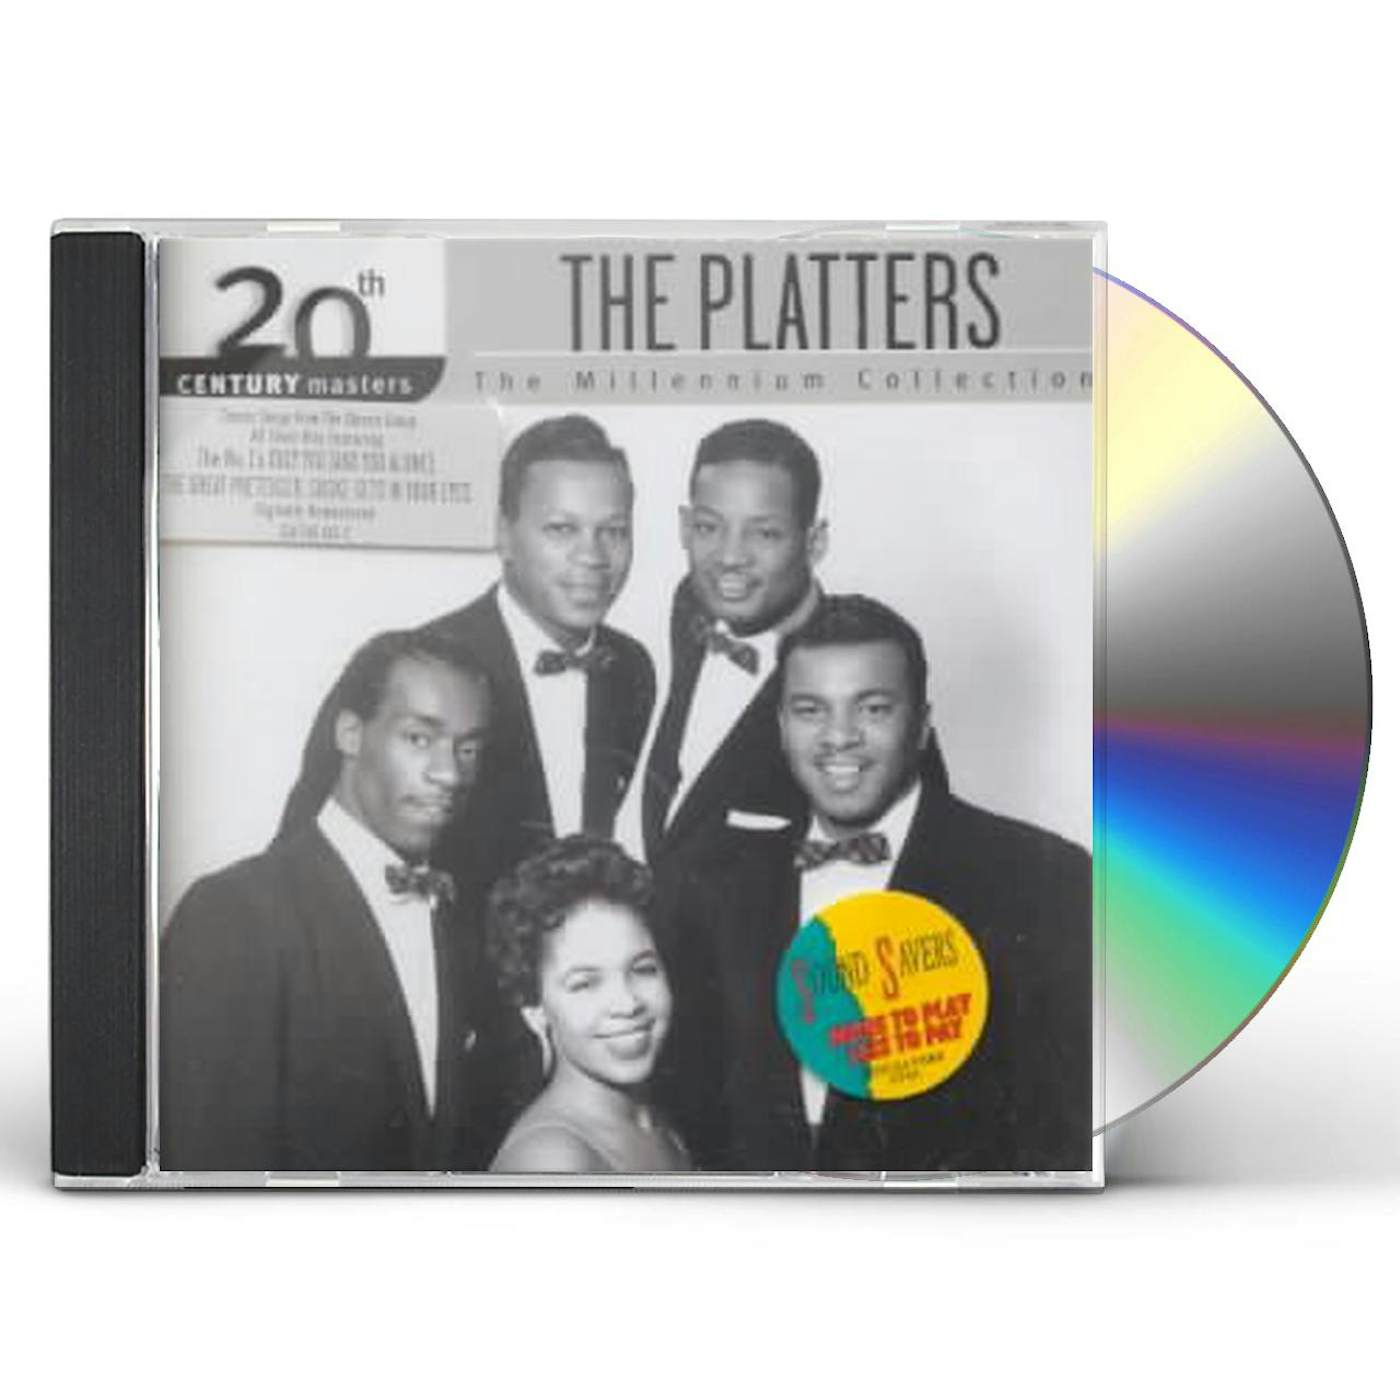 The Platters 20TH CENTURY MASTERS CD